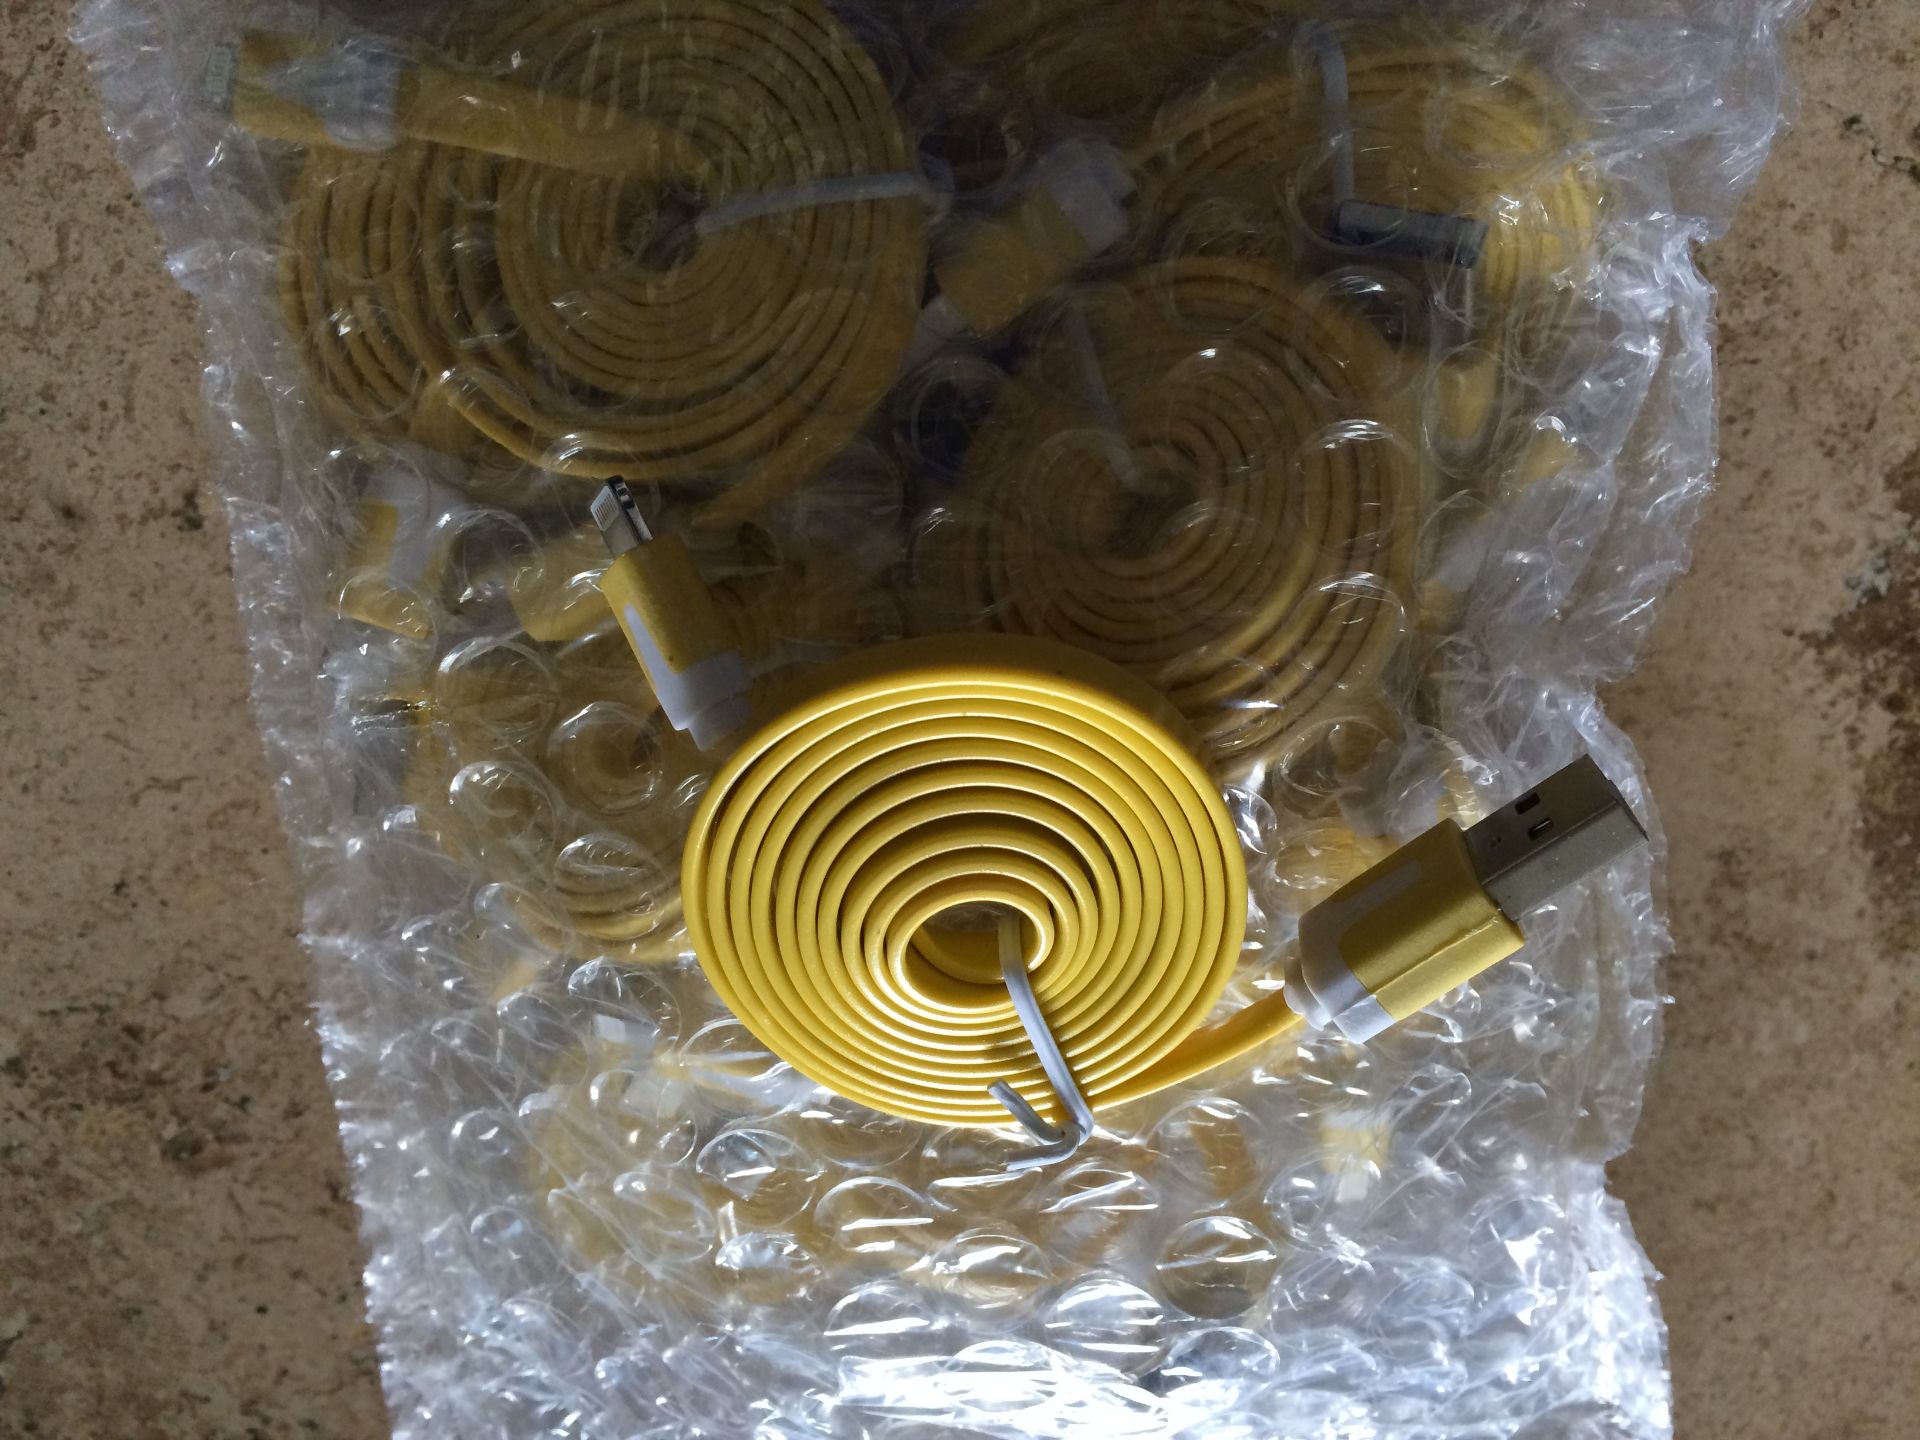 18 x Yellow Lightning Chargers for Apple Iphone/iPad.  GRADE: New